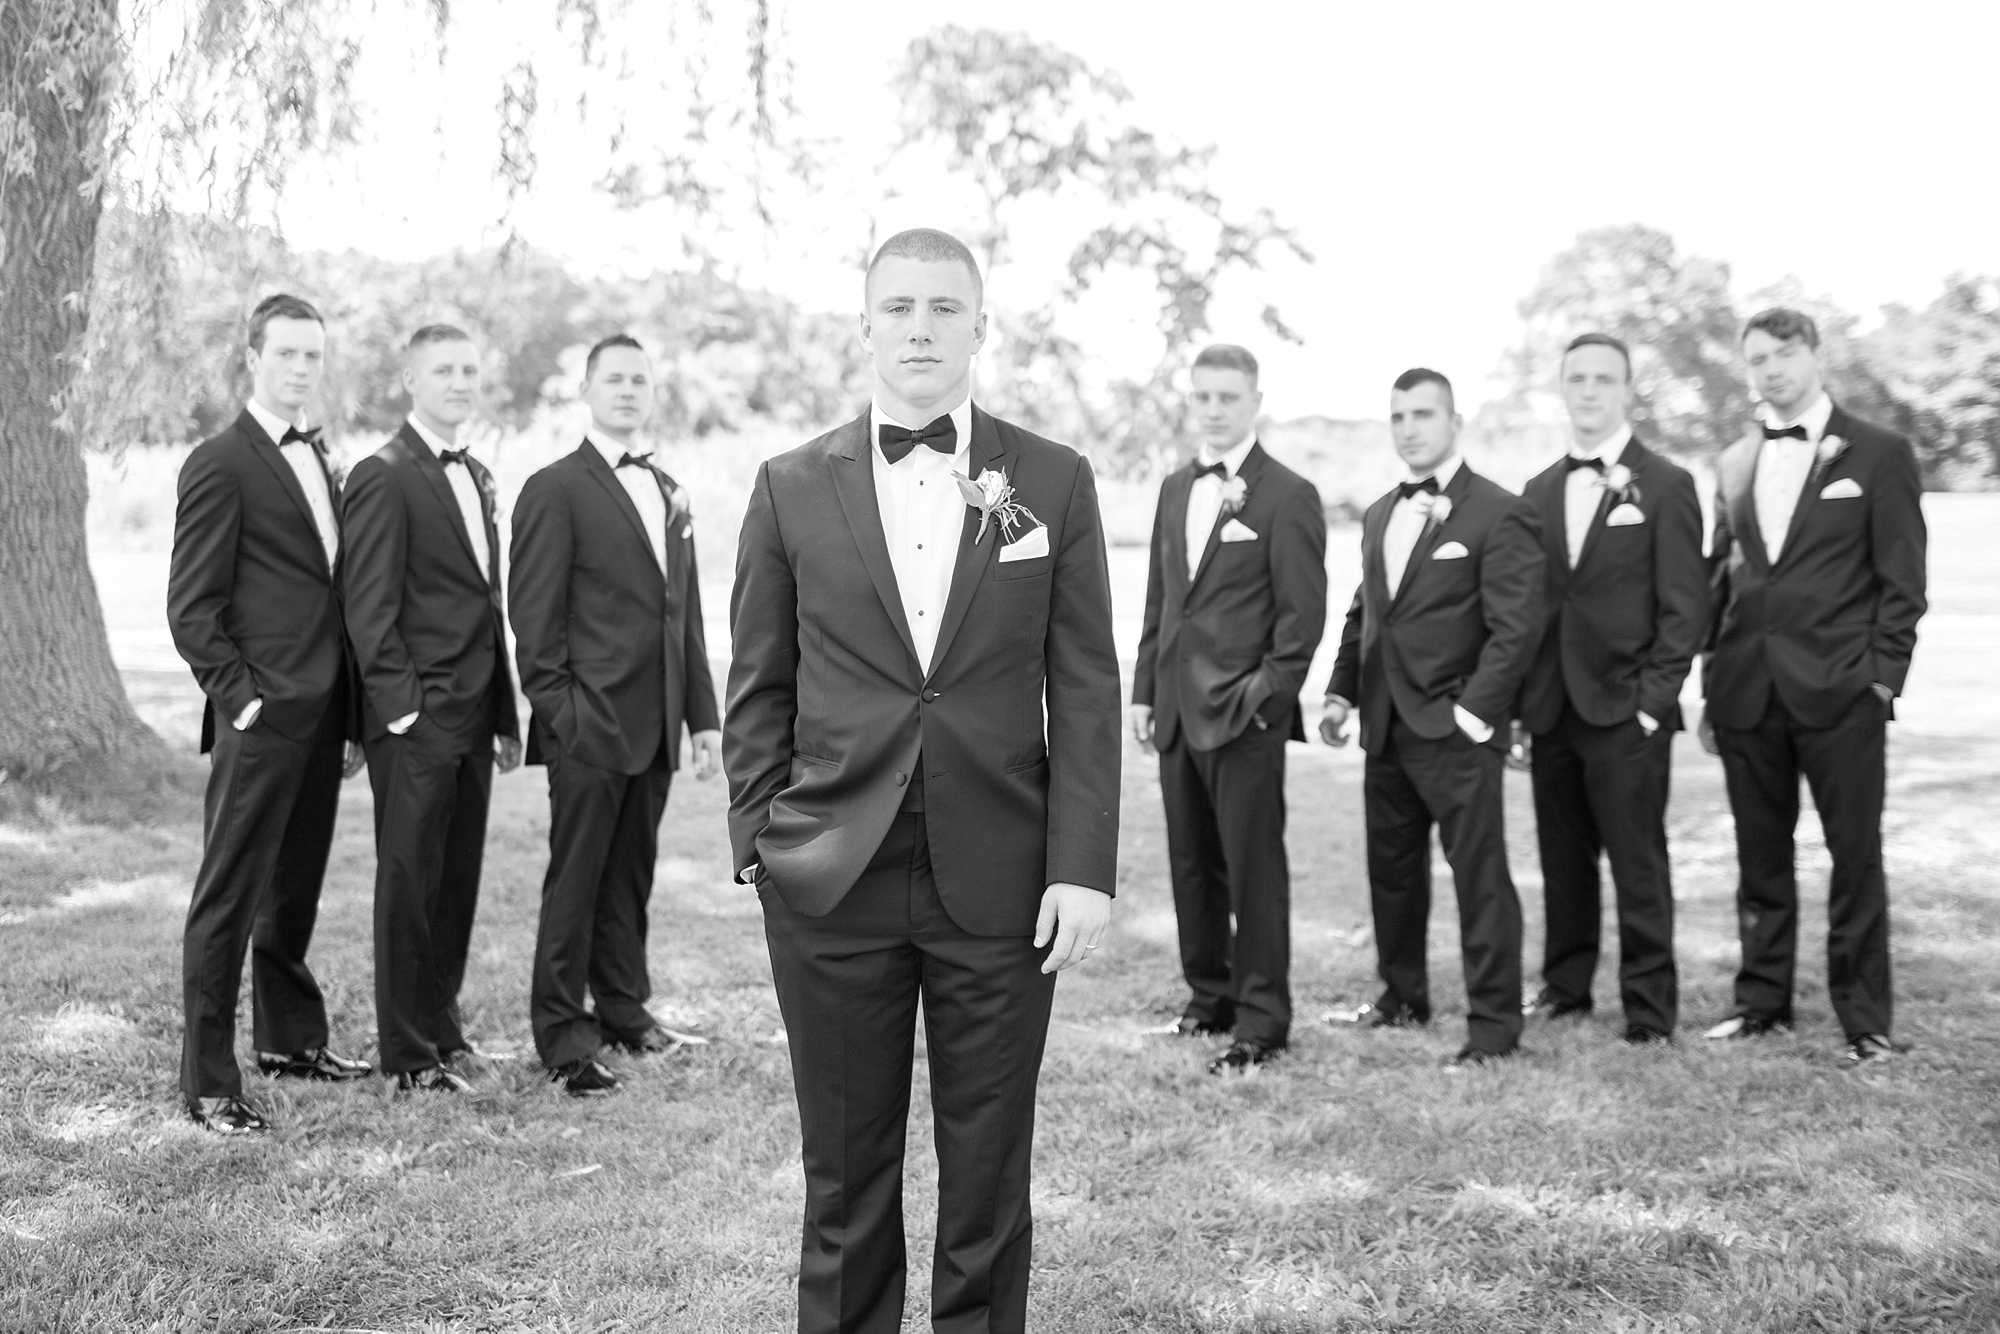 Peterson 4-Bridal Party-387_anna grace photography milford connecticut destination wedding photographer Great River Country Club photo.jpg